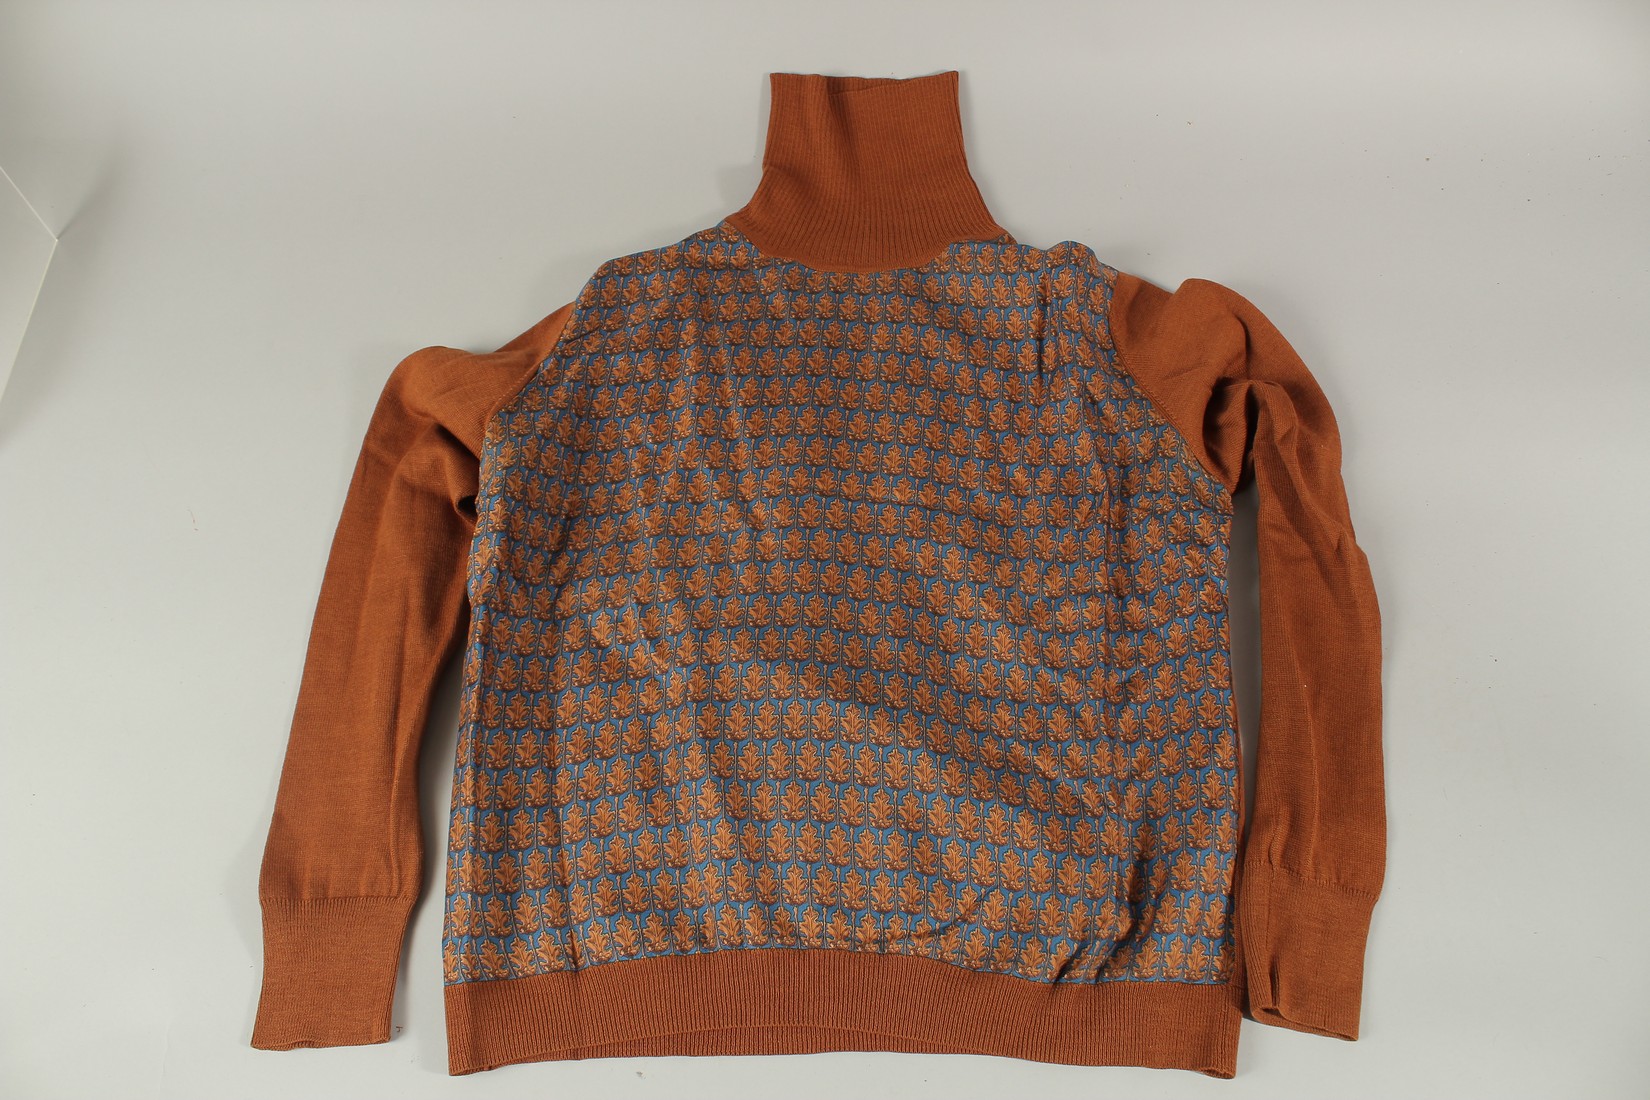 A HERMES TAN AND BLUE, SILK AND WOOL, POLO NECK LONG SLEEVED SWEATER.